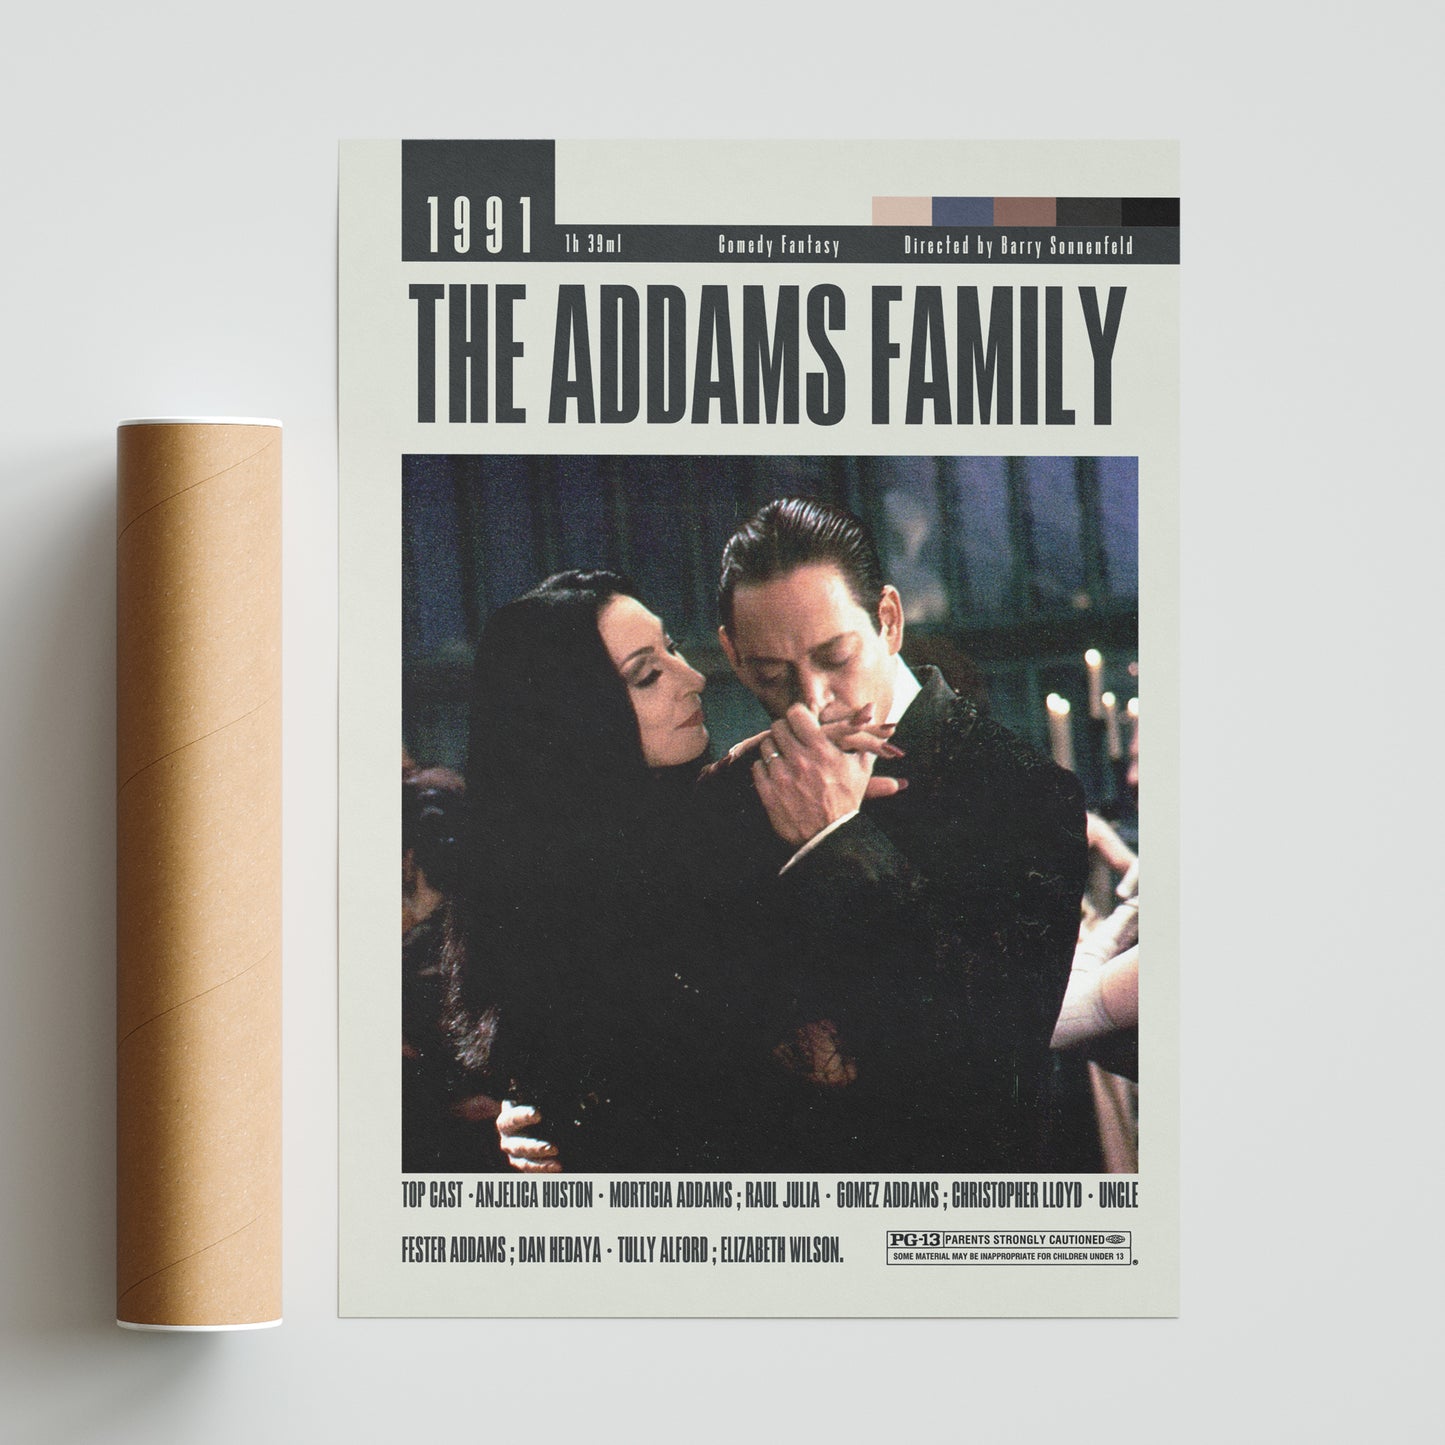 Enhance your movie room or home theater with our original Addams Family Values Poster from Barry Sonnenfeld Movies. This unframed vintage movie art poster is a unique addition to any collection. Display your love for the best movies of all time with this custom minimalist wall art print.